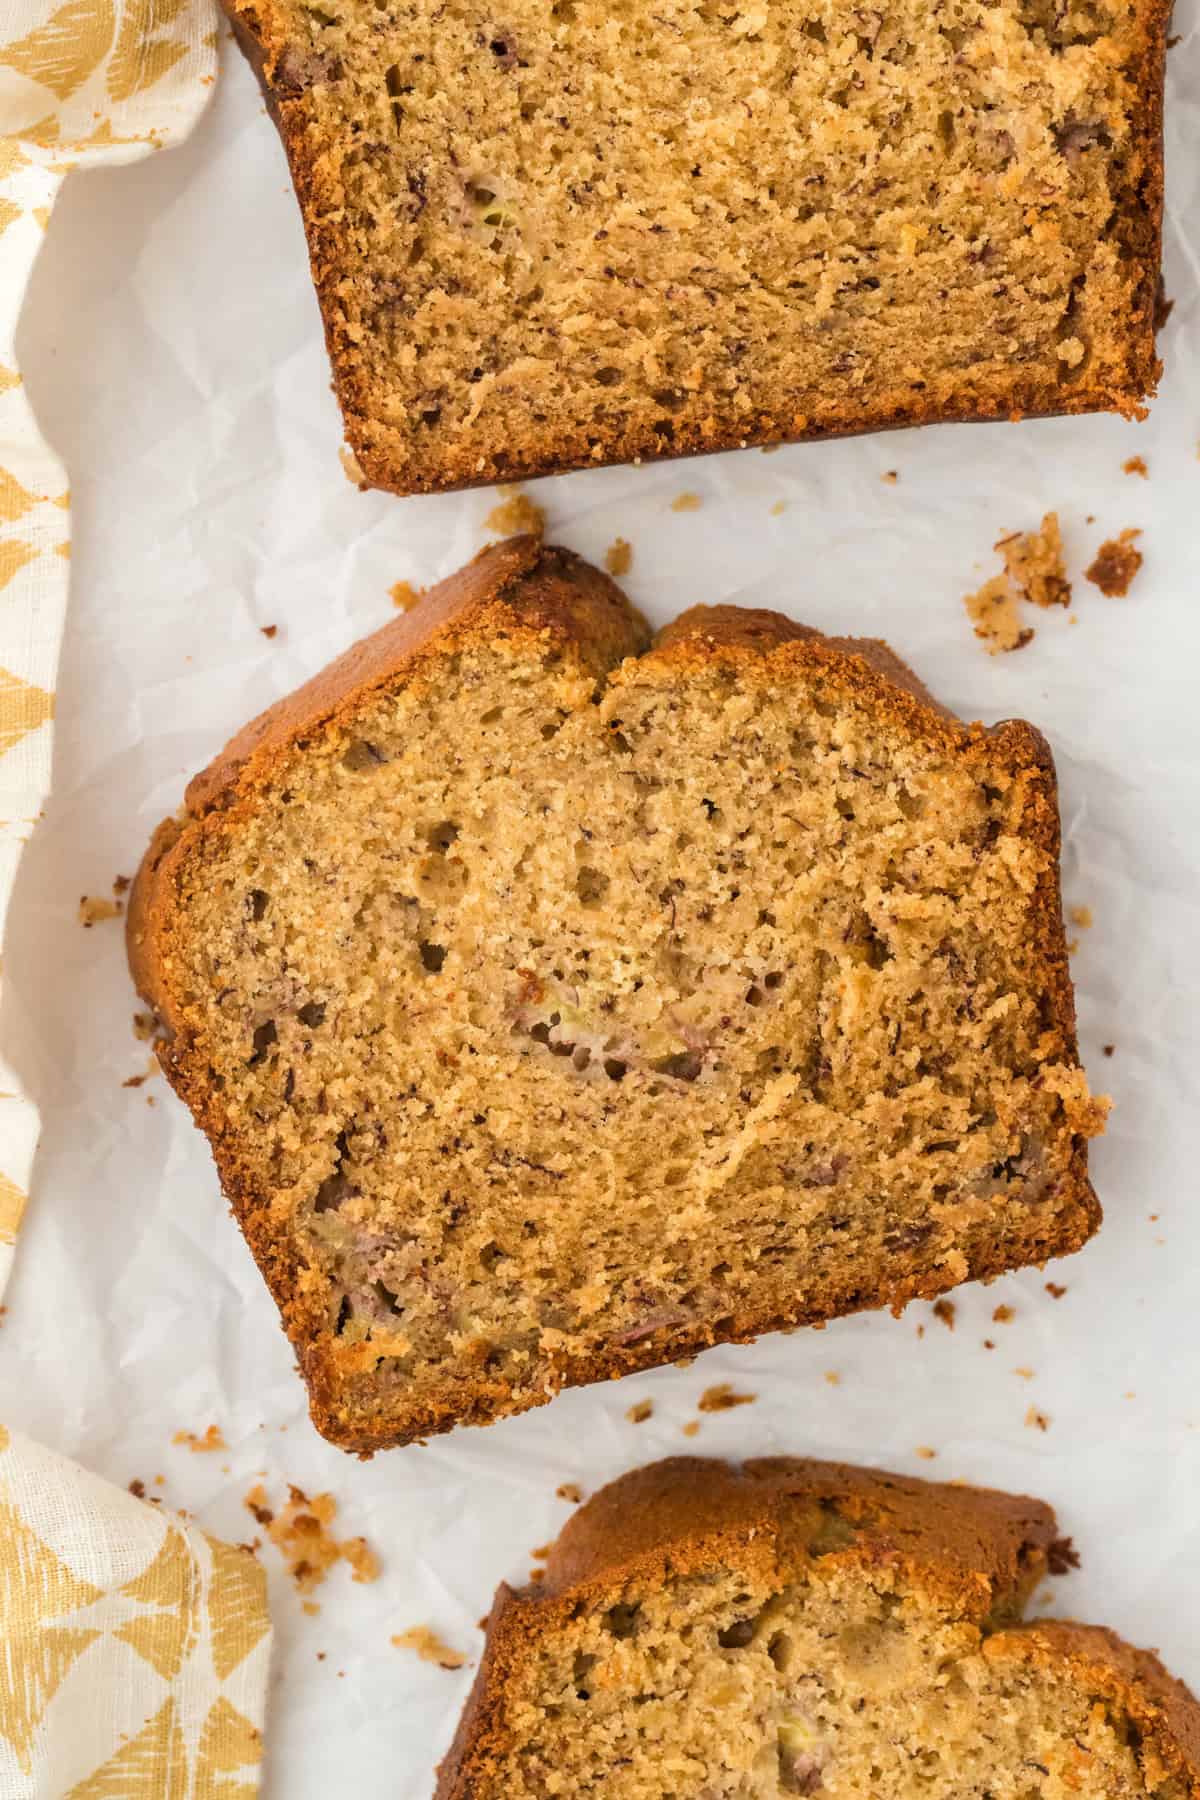 Slices of a simple banana bread on a white background